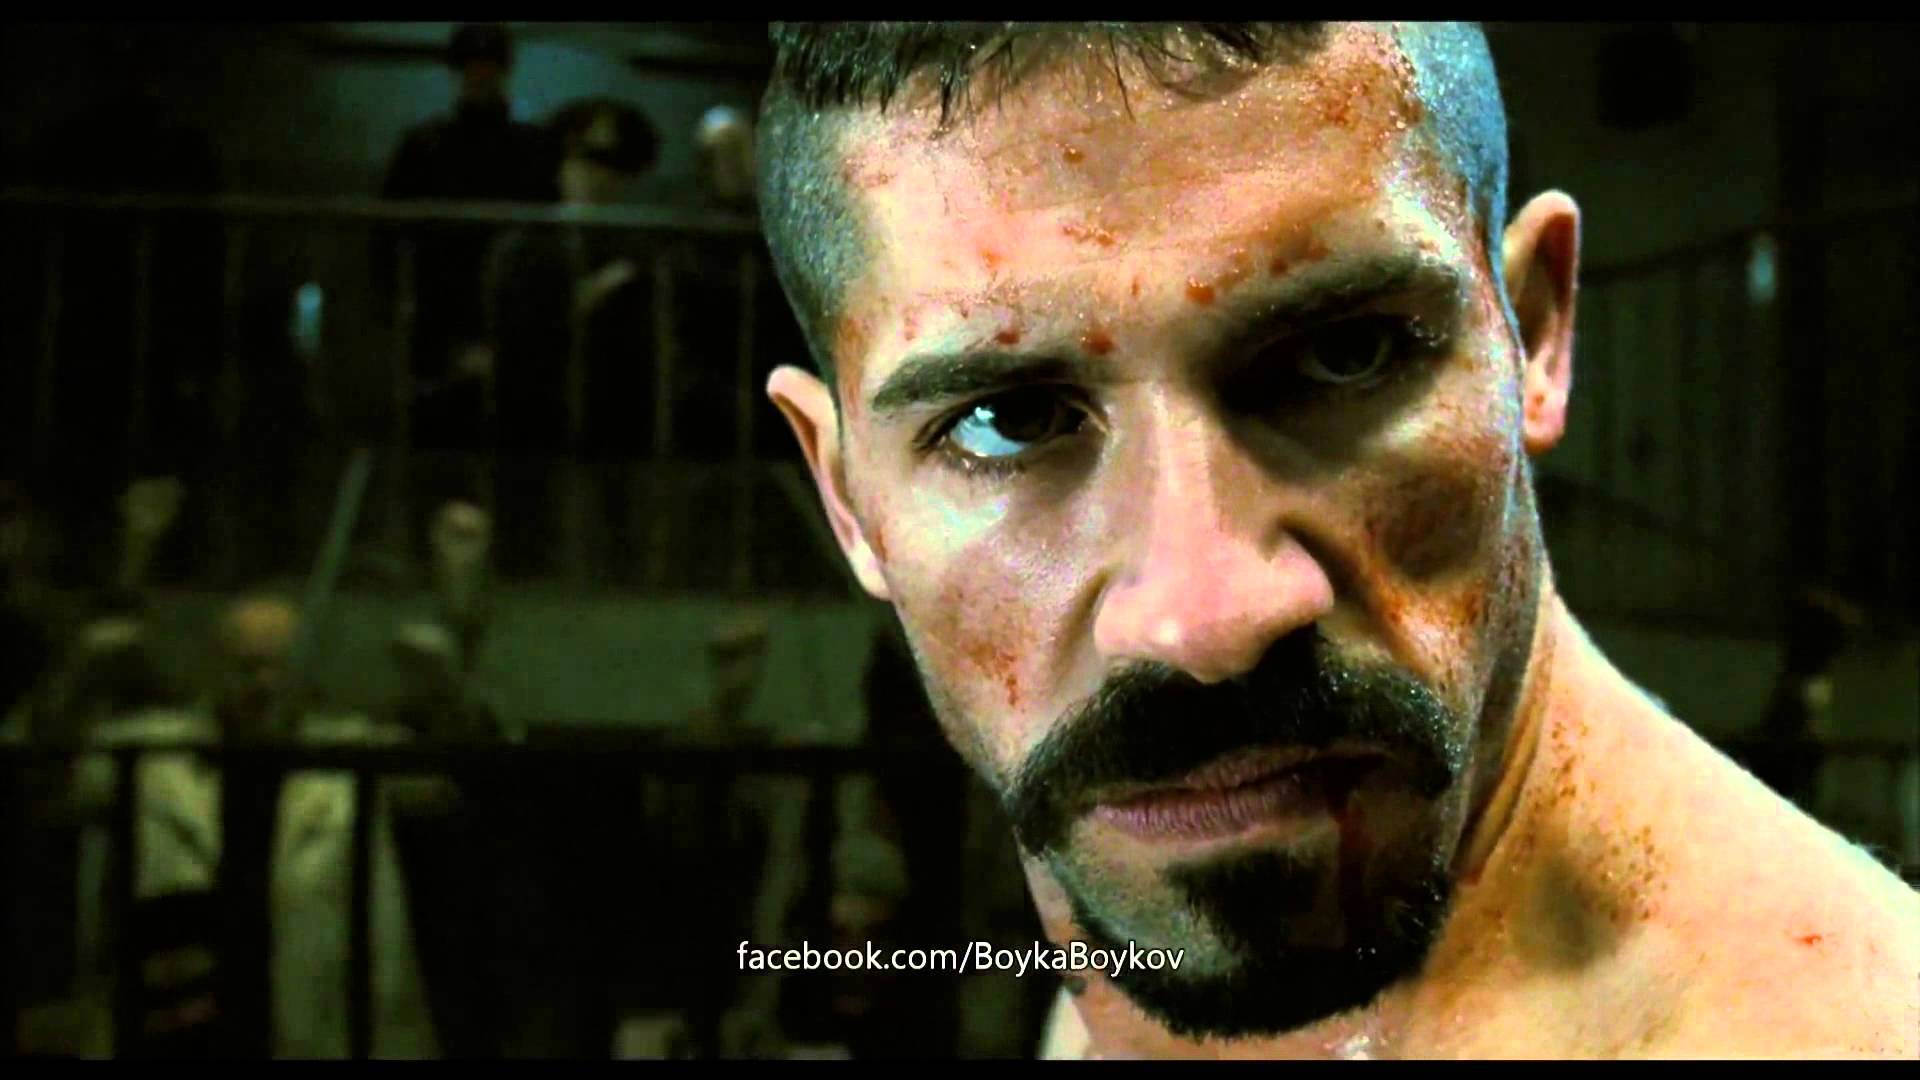 Famous fighter Scott Adkins wallpapers and images - wallpapers ...